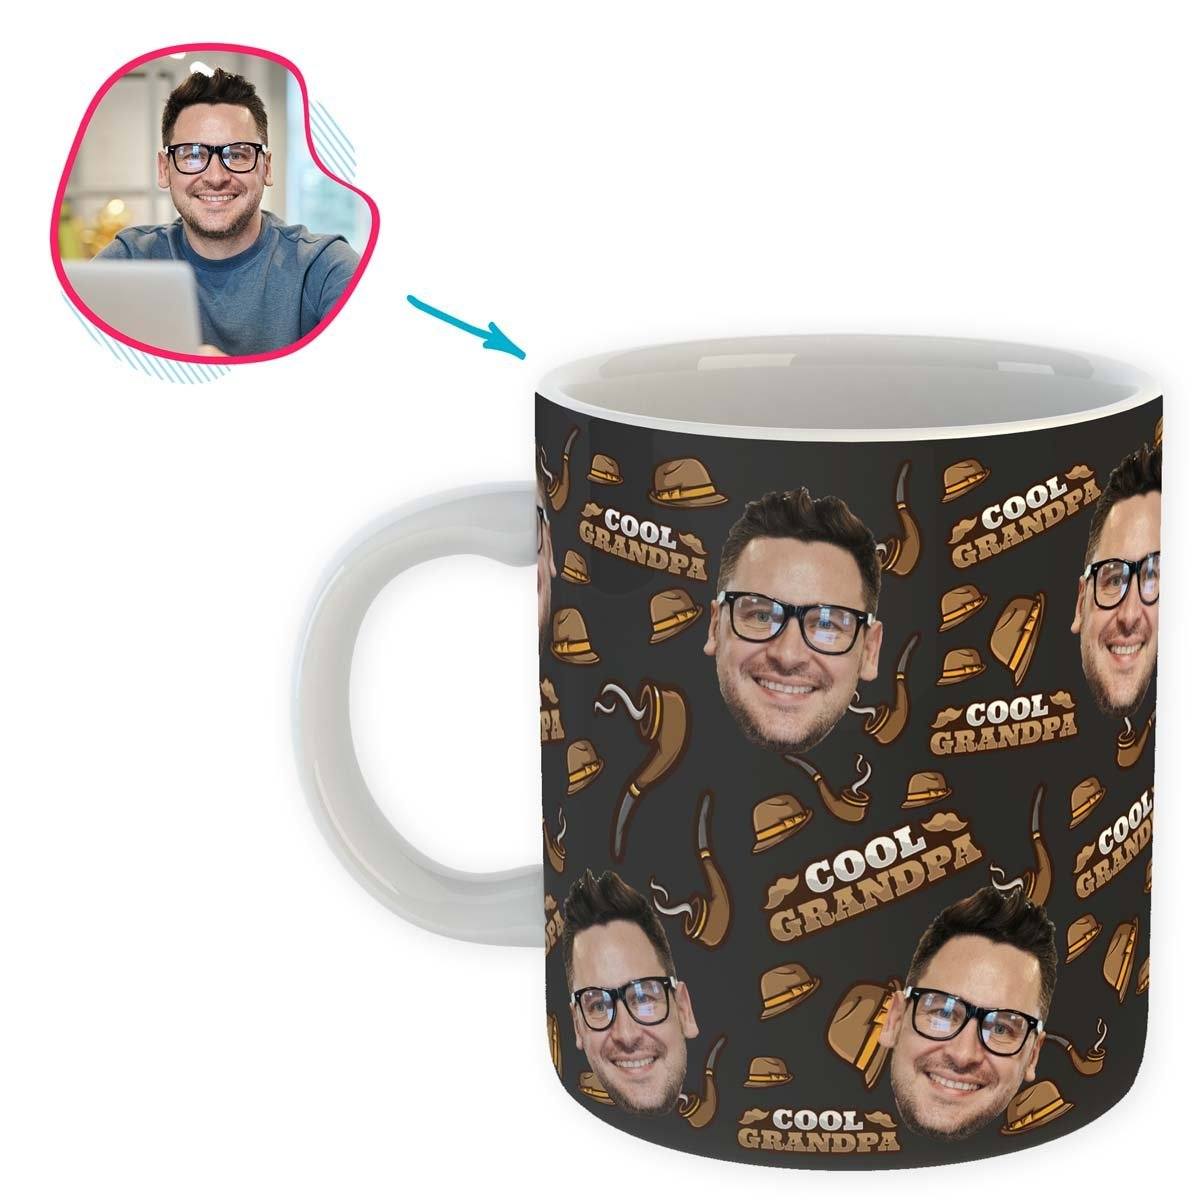 dark Cool Grandfather mug personalized with photo of face printed on it